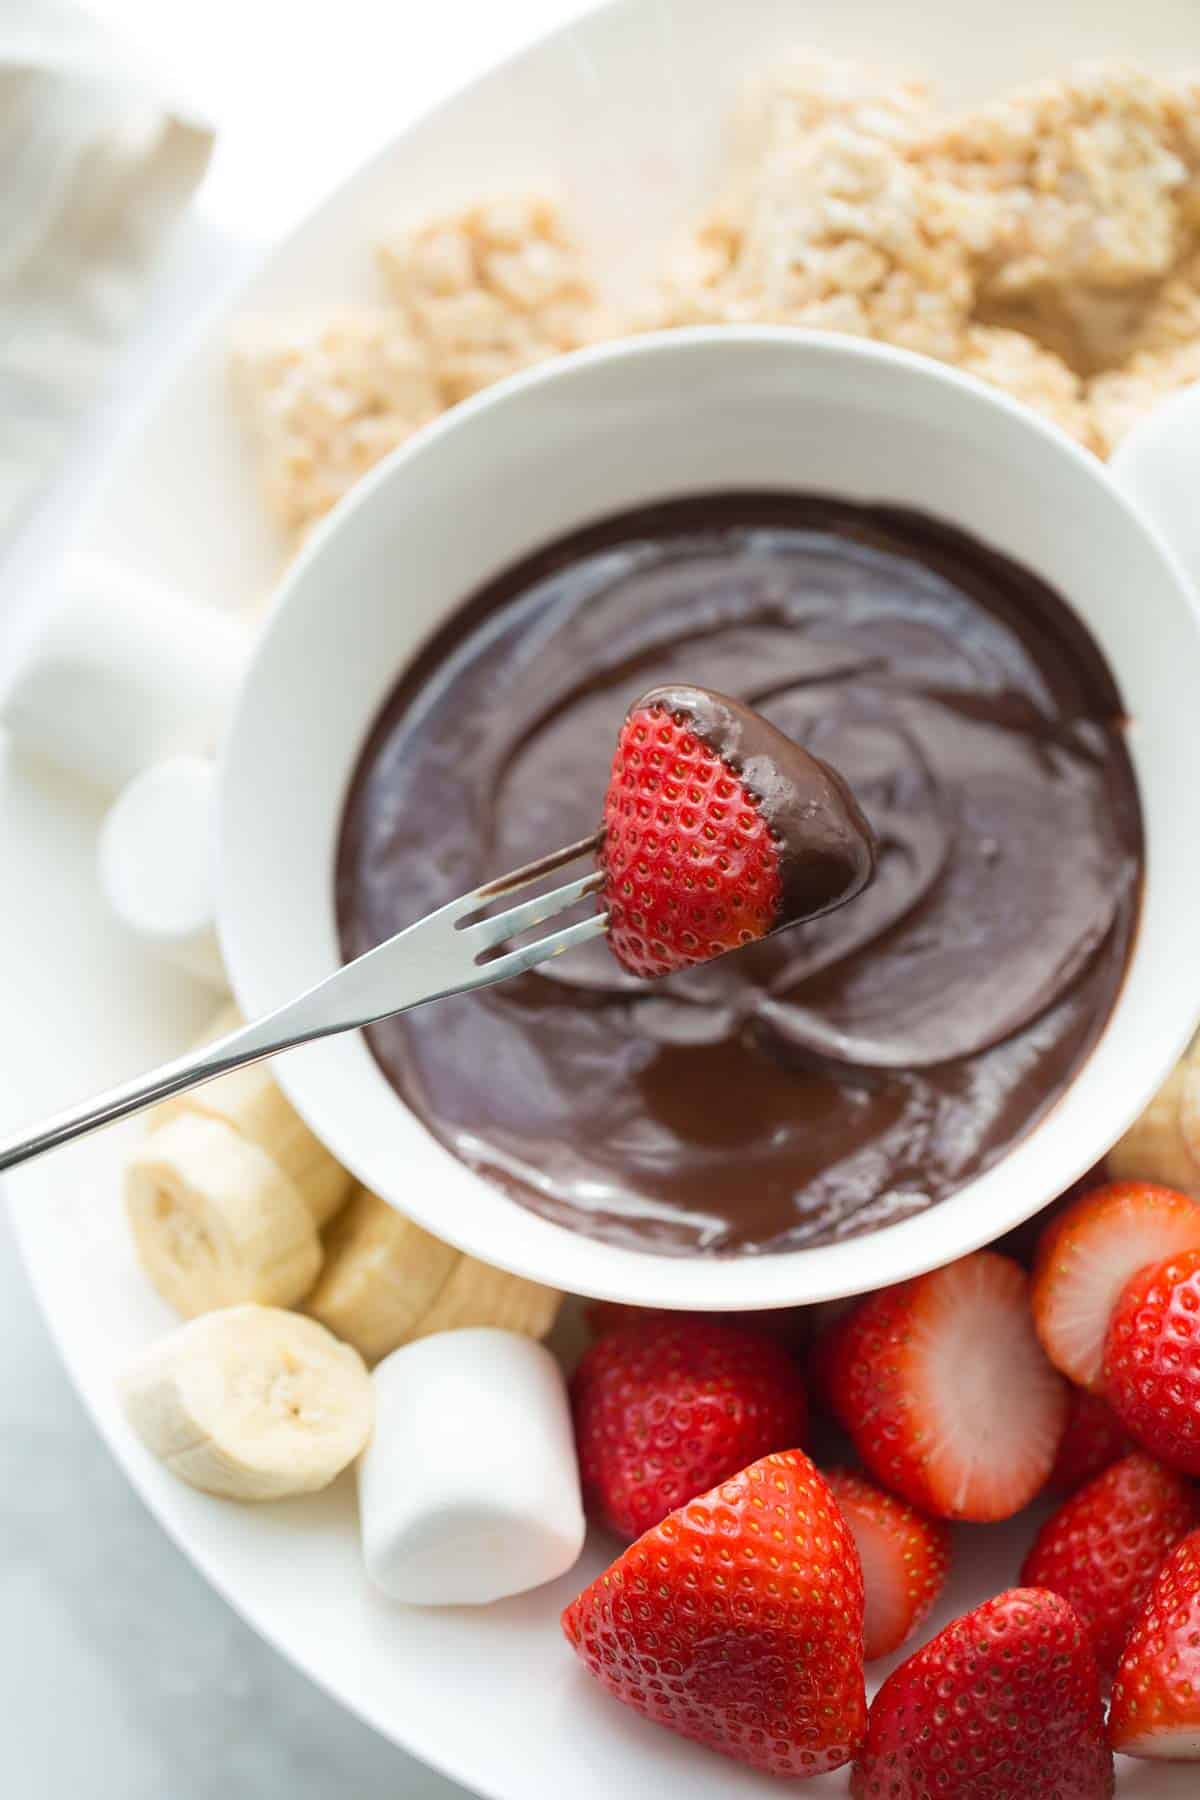 strawberry being dipped into chocolate fondue